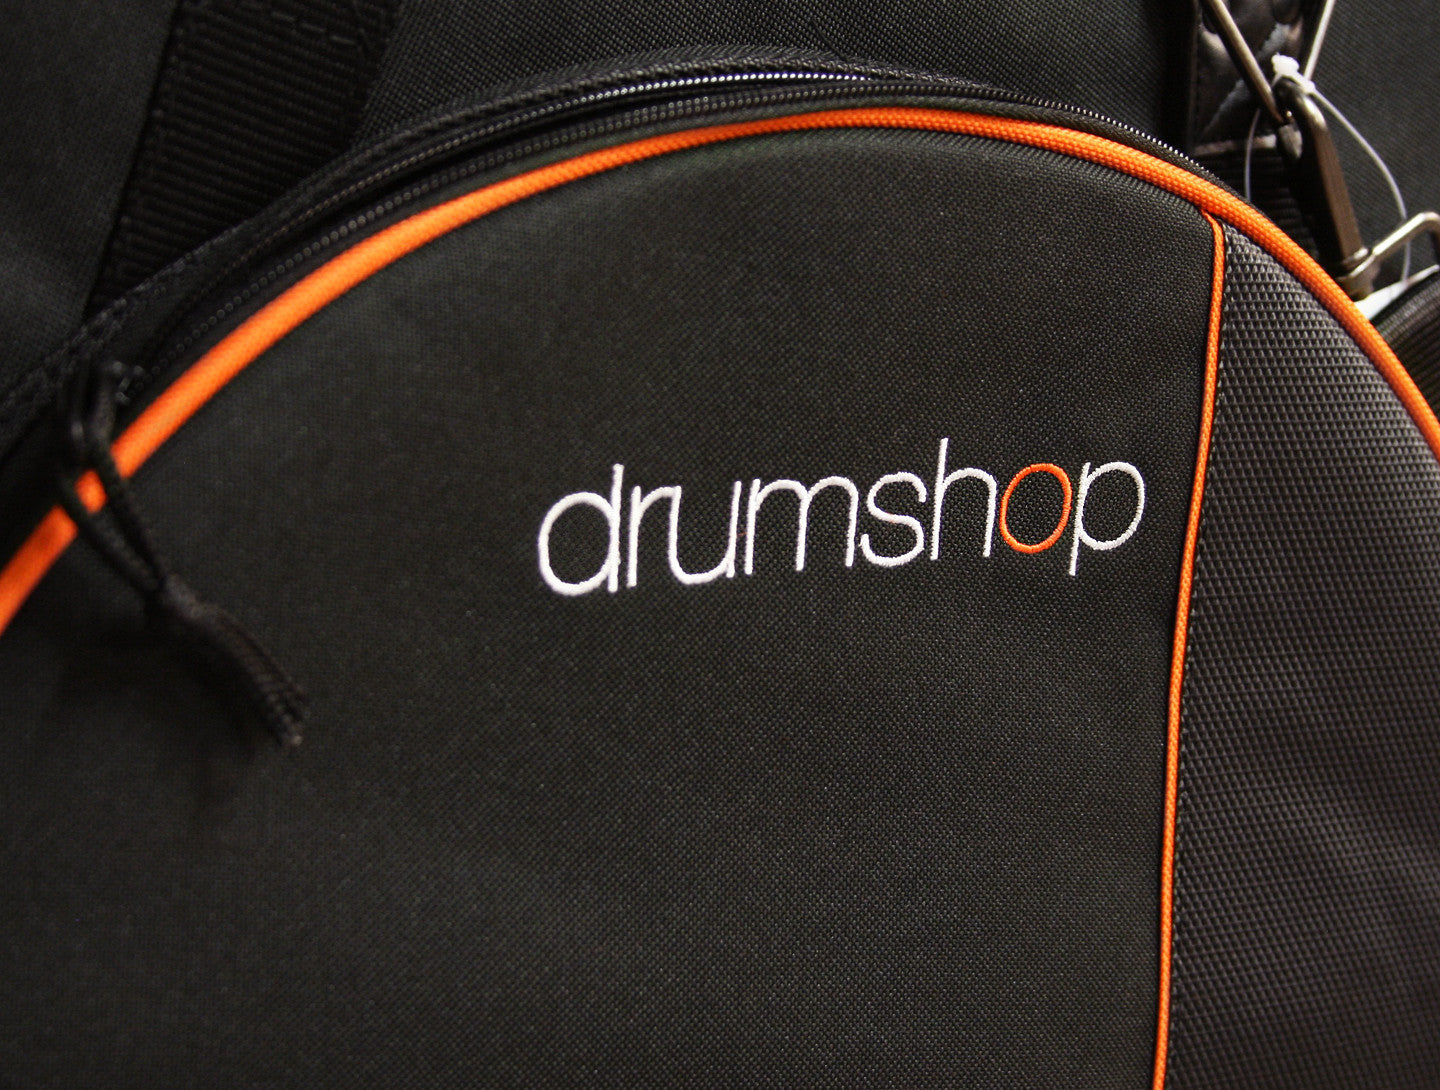 Drumshop Deluxe Cymbal Case close up